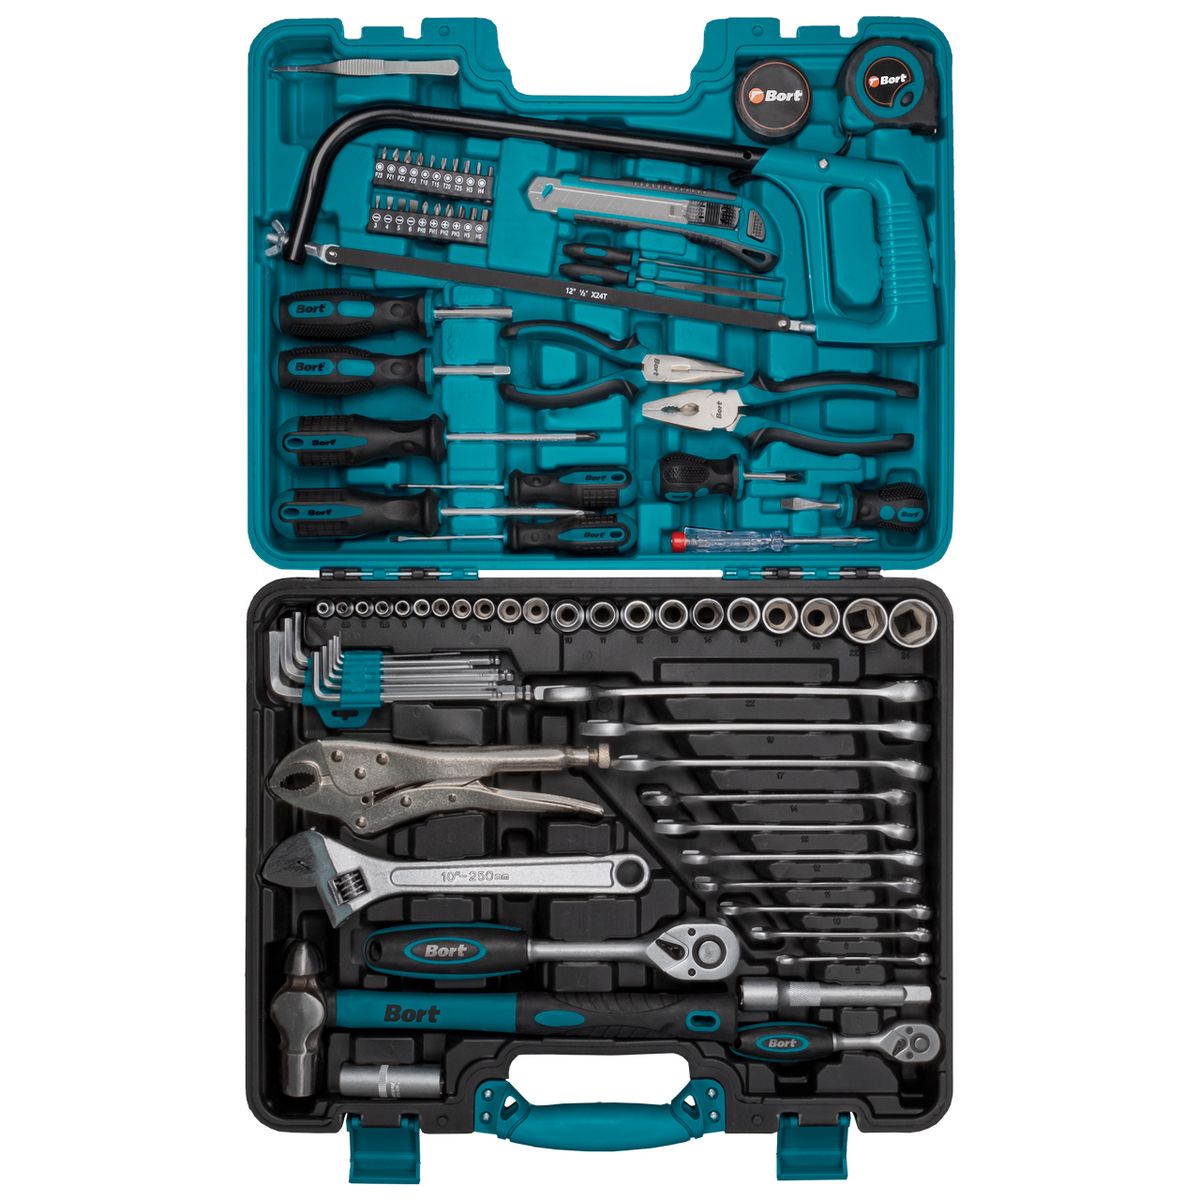 Bort - Mechanics DIY Hand Tool Set with Spanners and Sockets - 86 Pieces